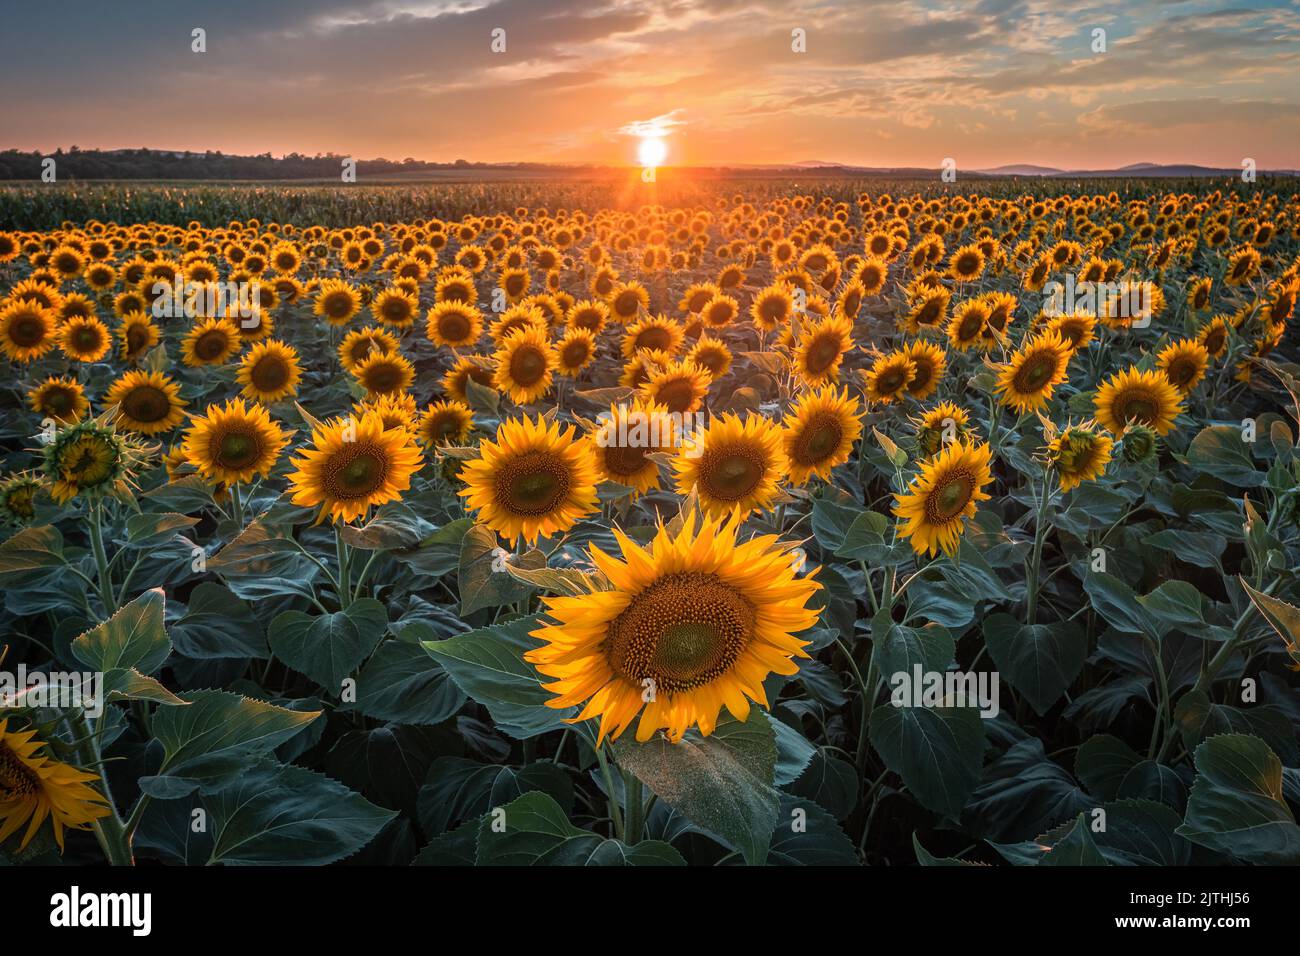 Balatonfuzfo, Hungary - Beautiful sunset over a sunflower field at summertime with colorful clouds and sky near Lake Balaton. Agricultural background Stock Photo